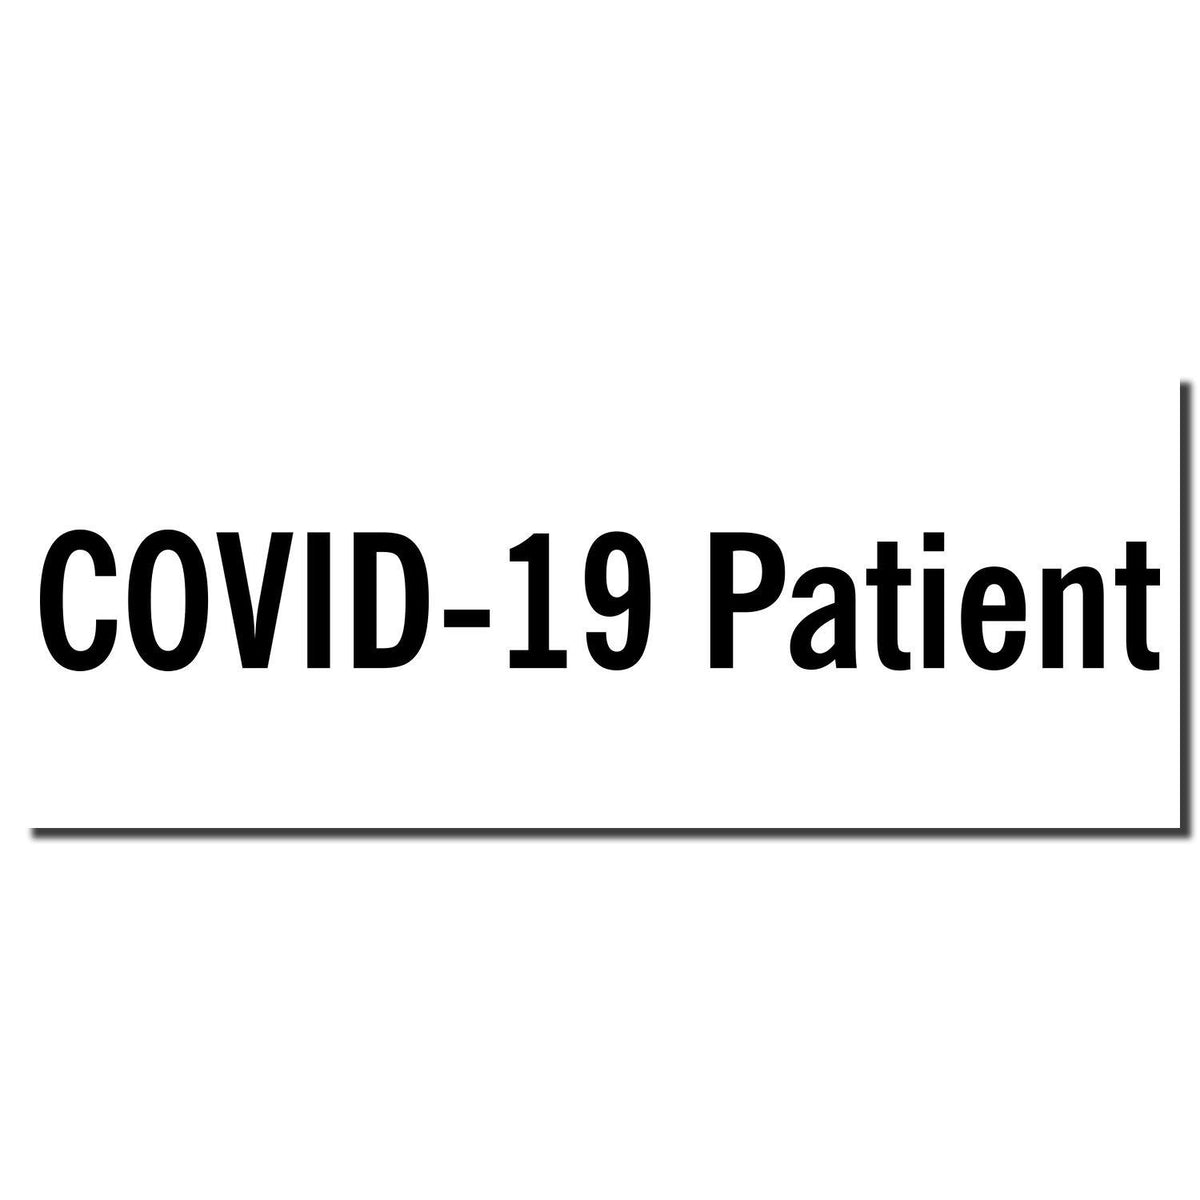 Enlarged Imprint Covid-19 Patient Rubber Stamp Sample